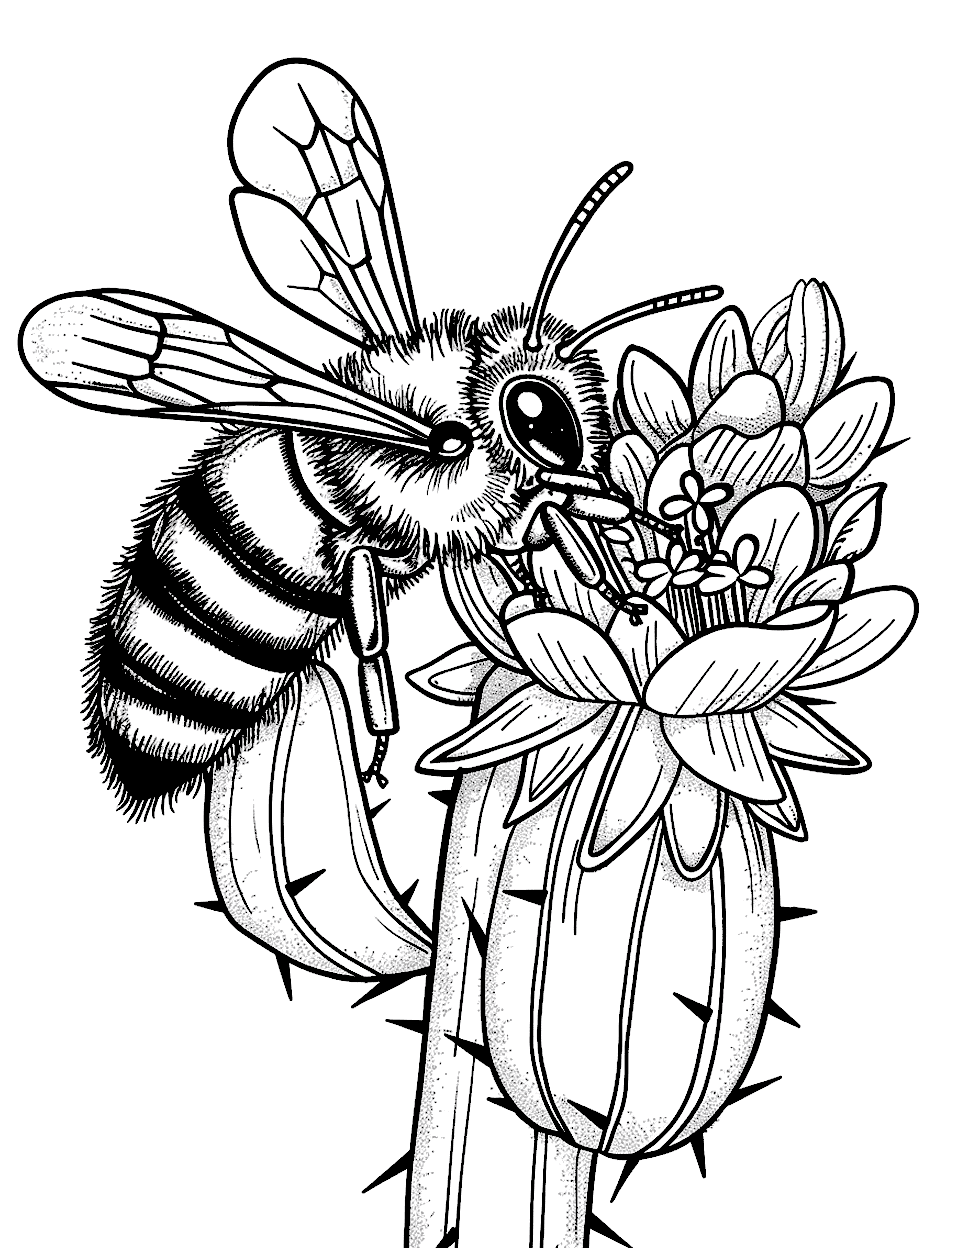 Honey Bee and Cactus Flower Coloring Page - A bee navigating the spines of a cactus to reach its vibrant flower.